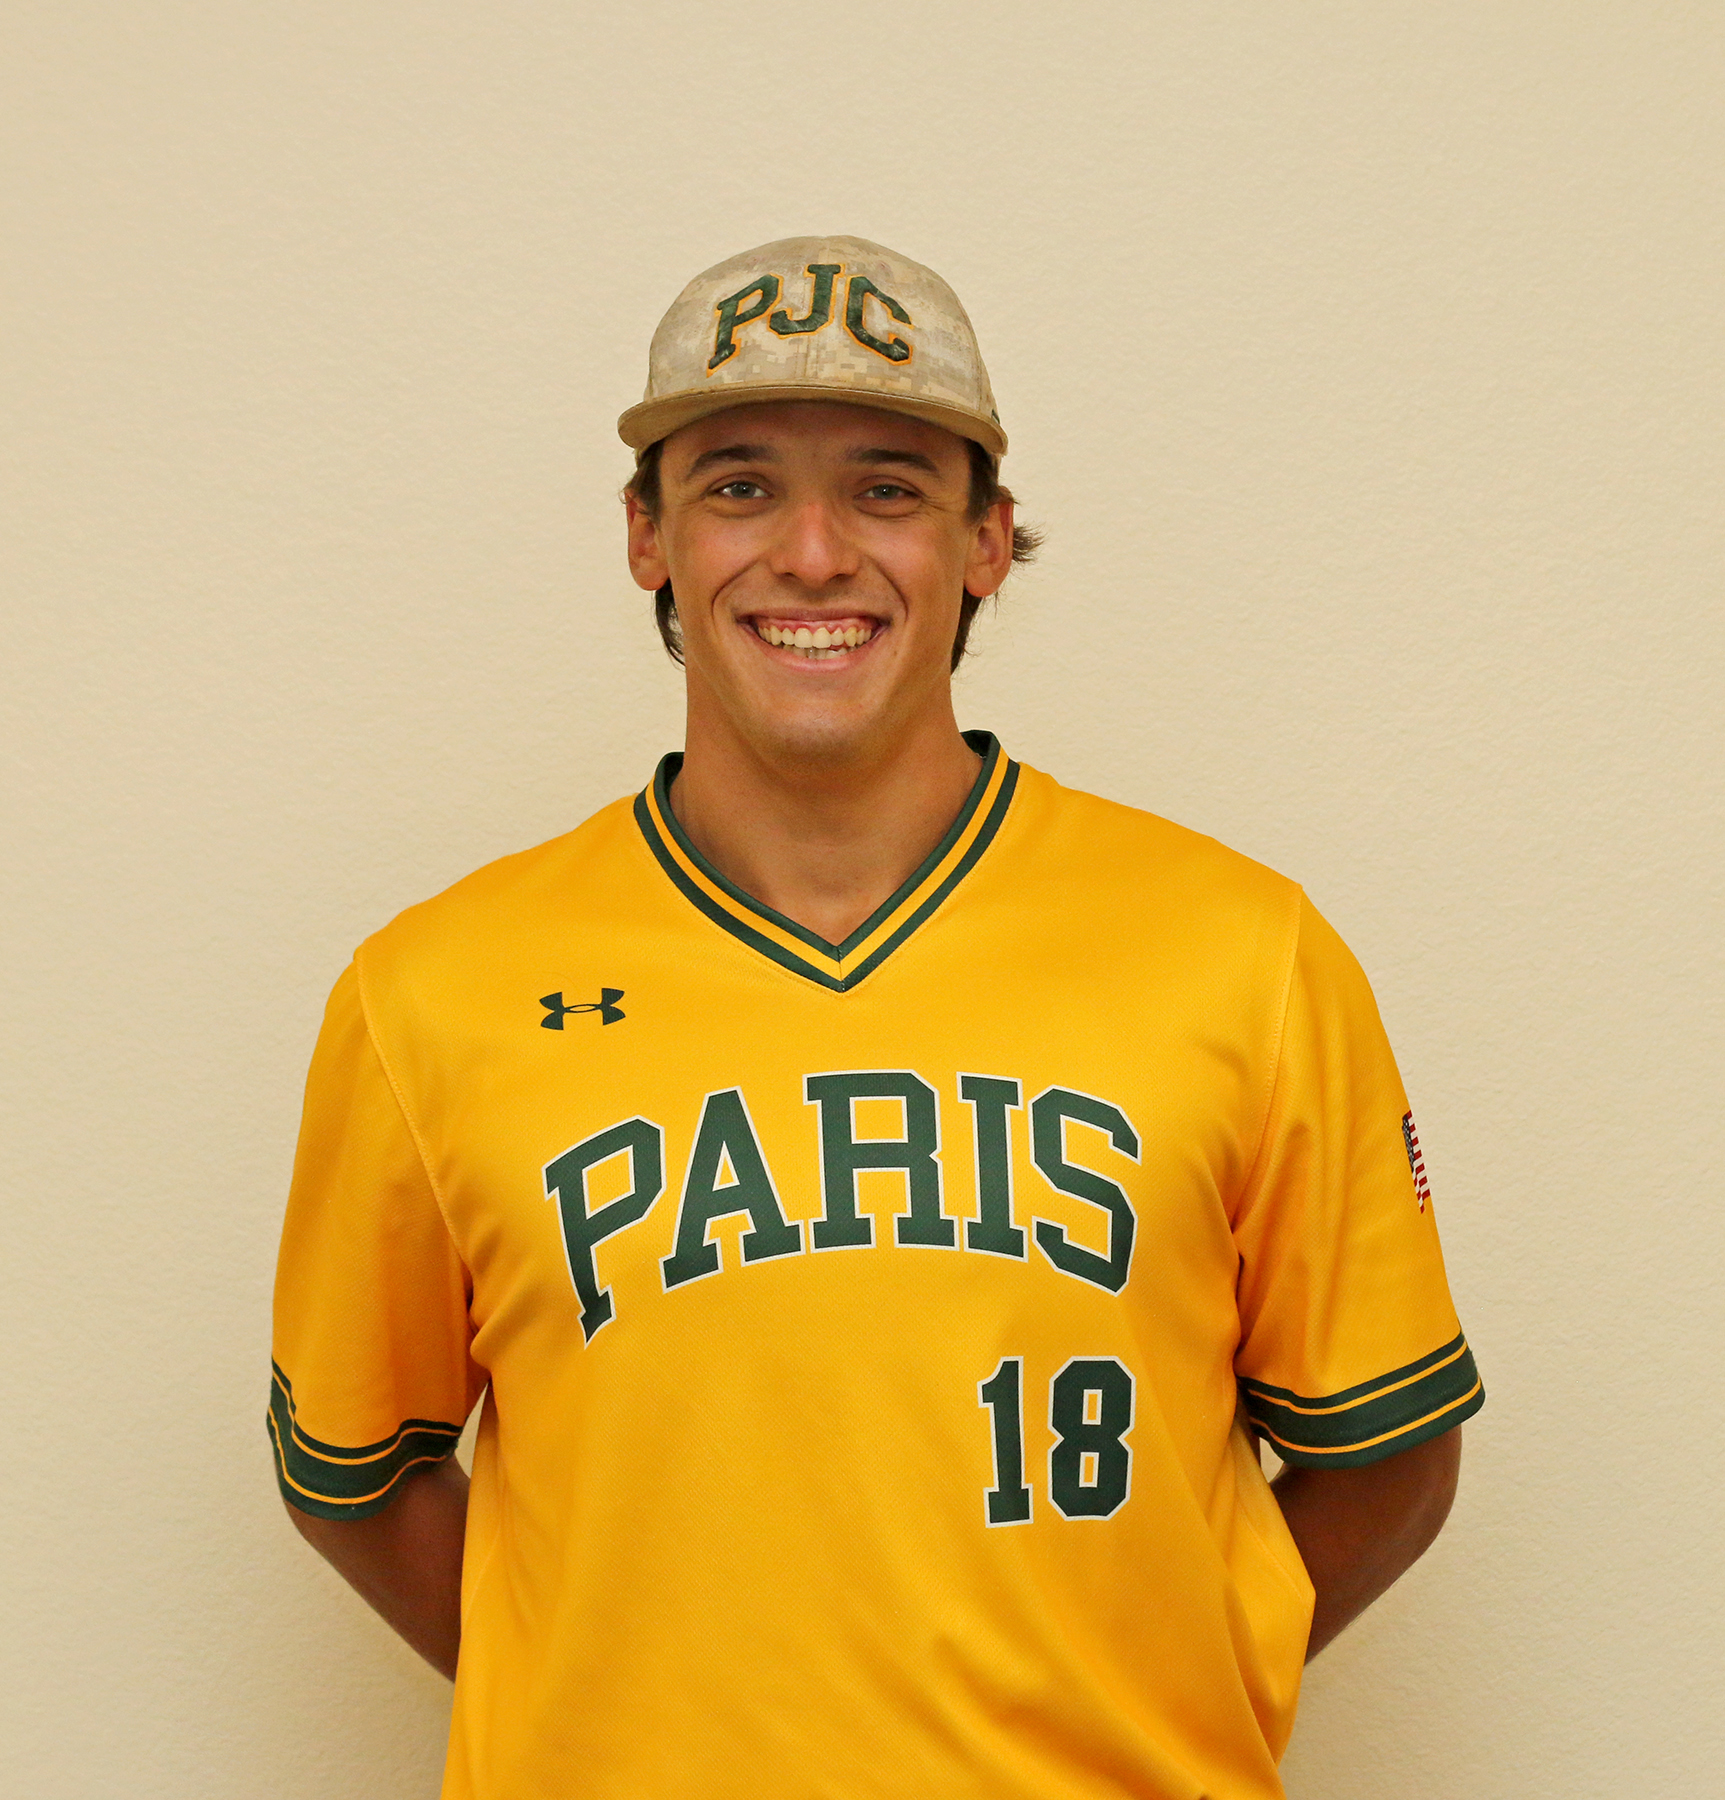 PJC’s Brewer drafted by New York Yankees